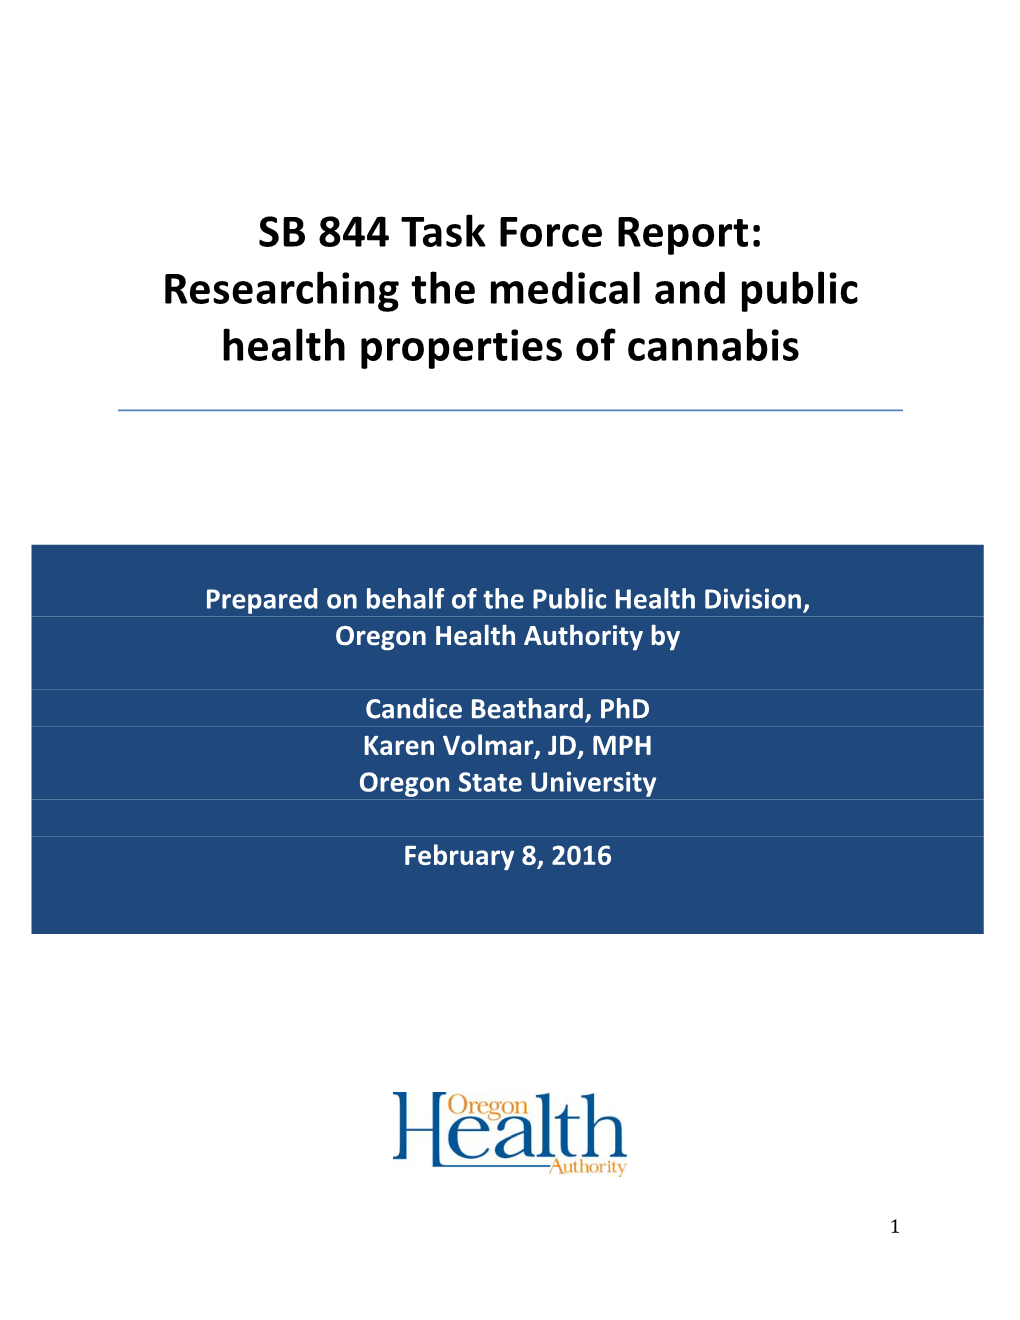 SB 844 Task Force Report: Researching the Medical and Public Health Properties of Cannabis